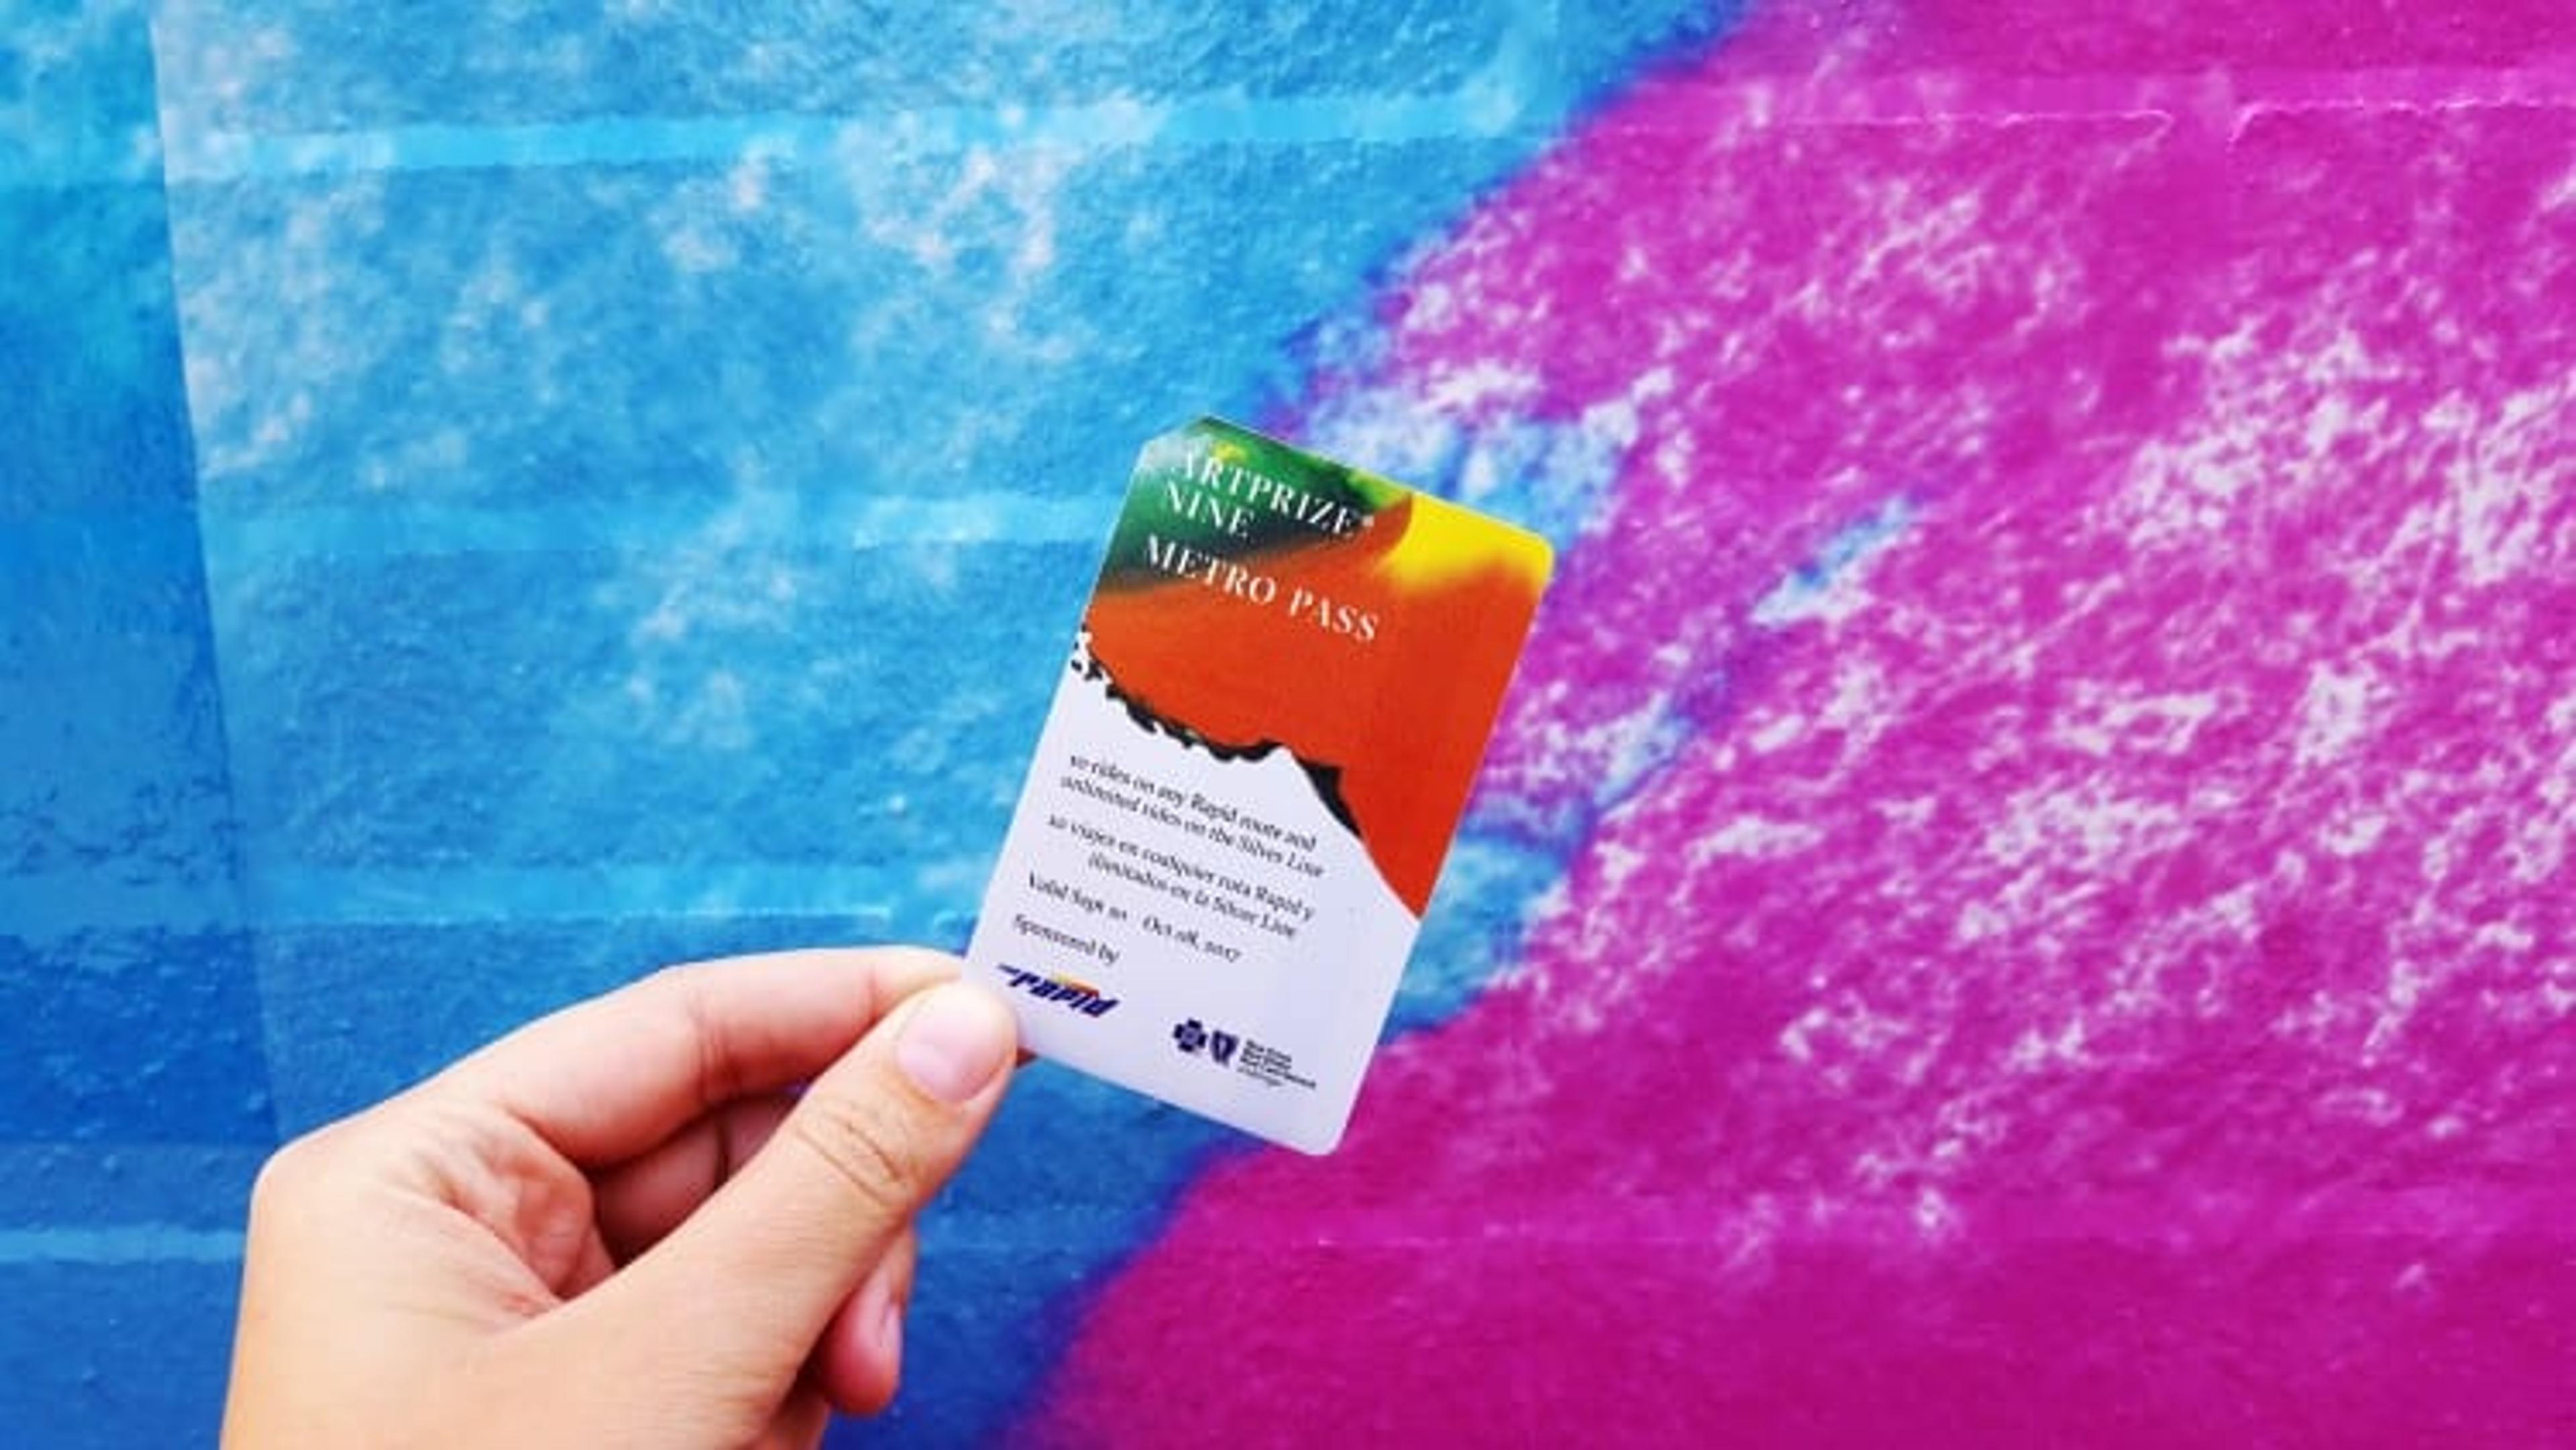 close up photo of a metro pass in front of a blue and pink background.